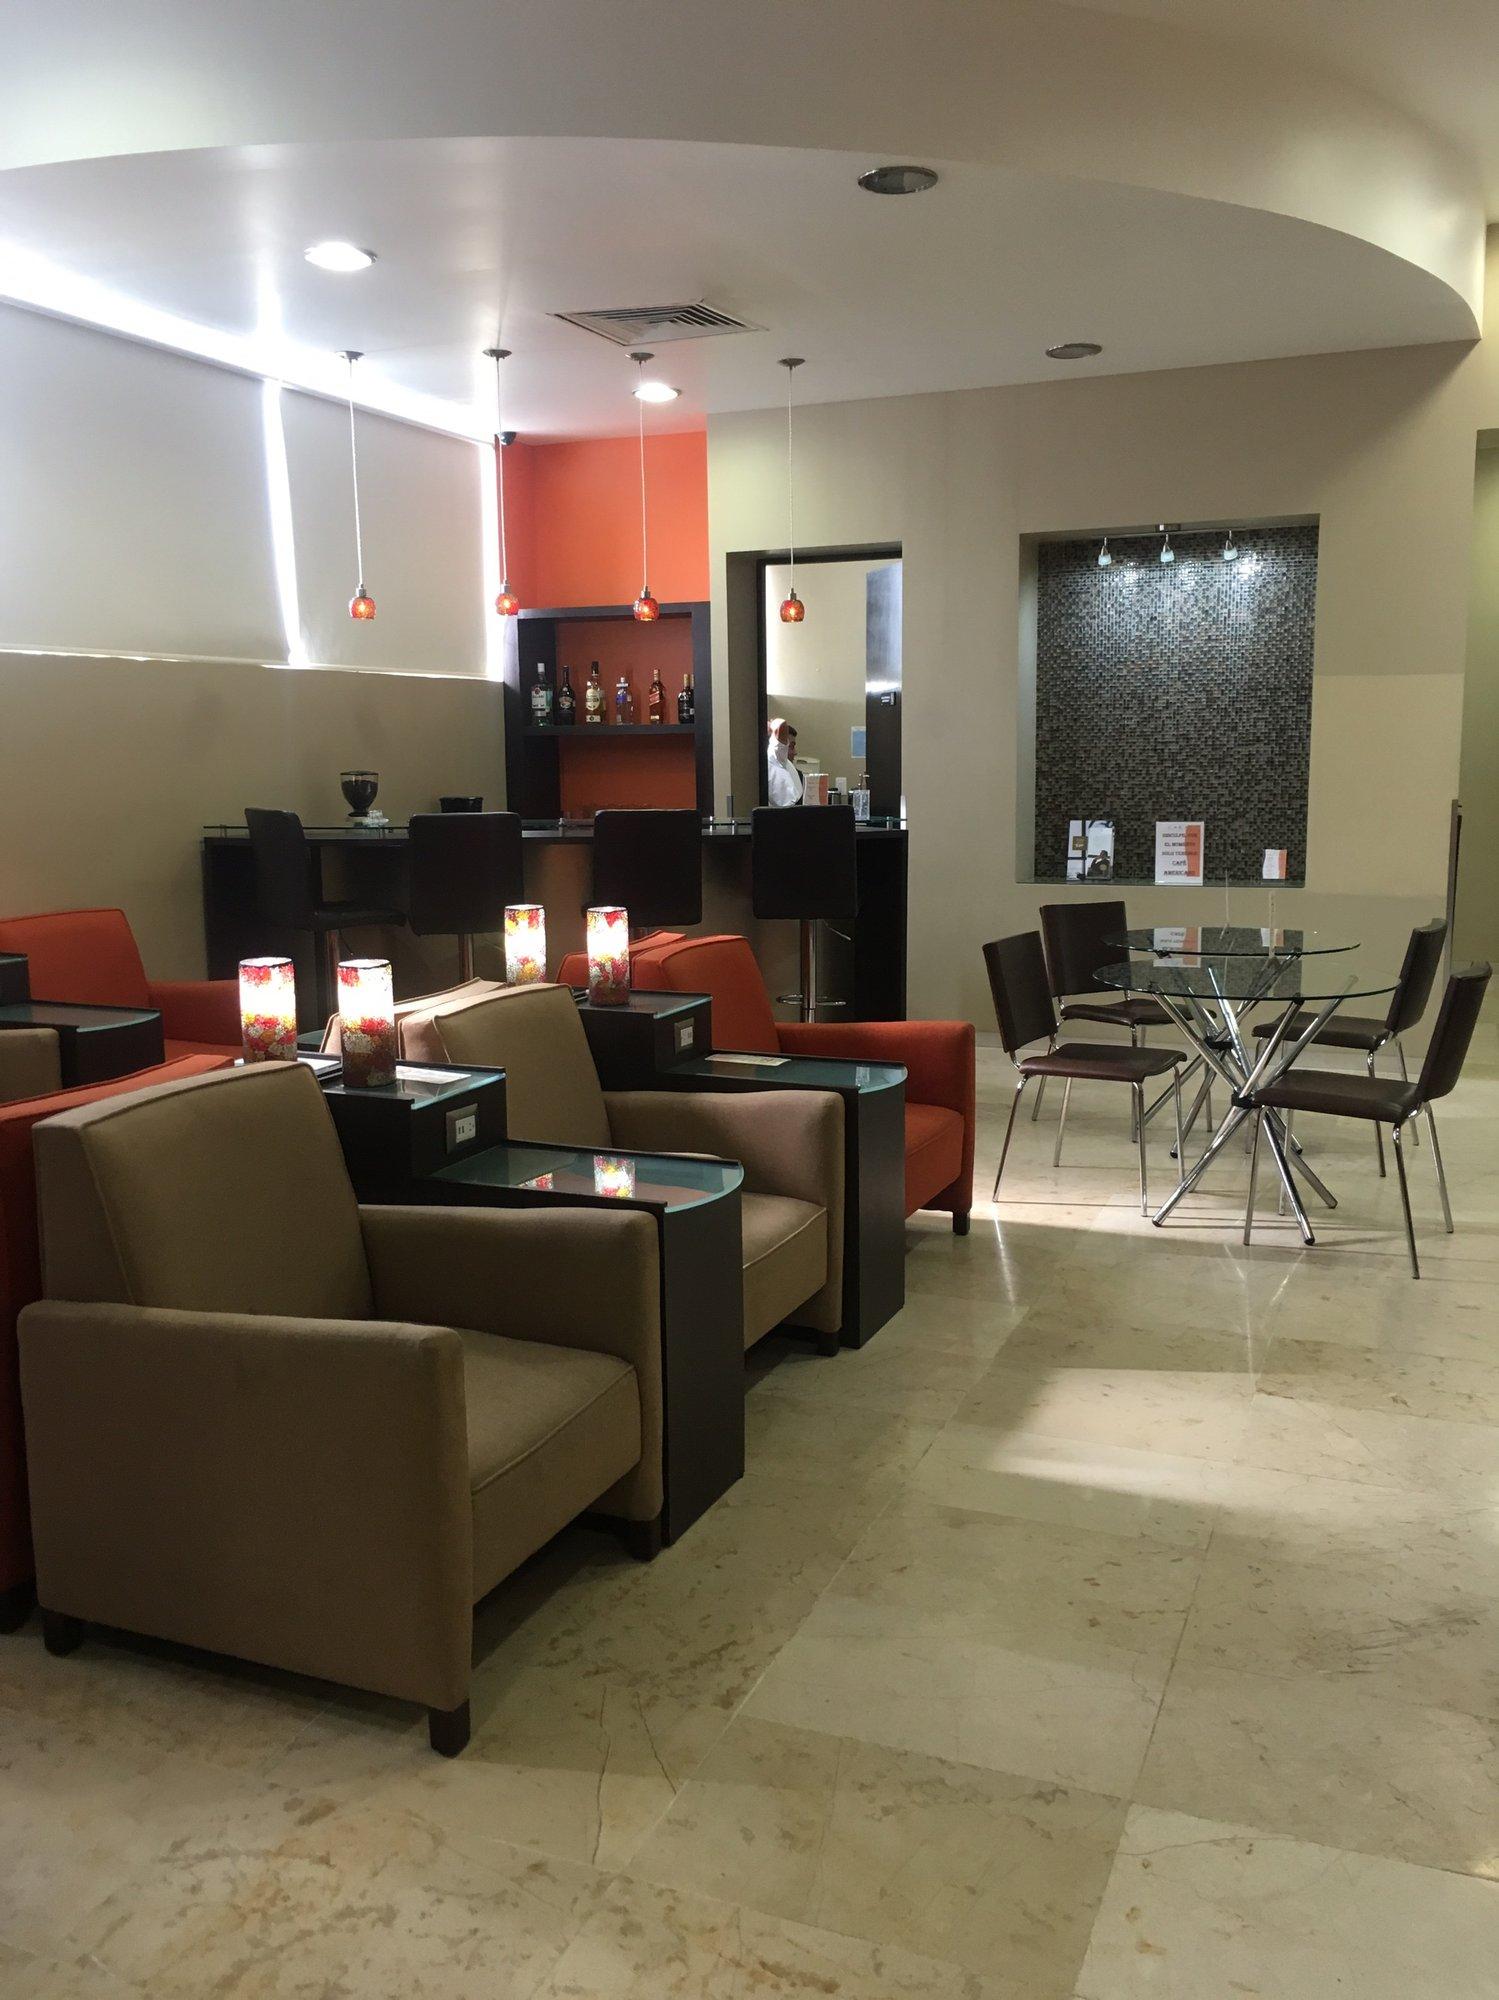 Caral VIP Lounge image 6 of 10